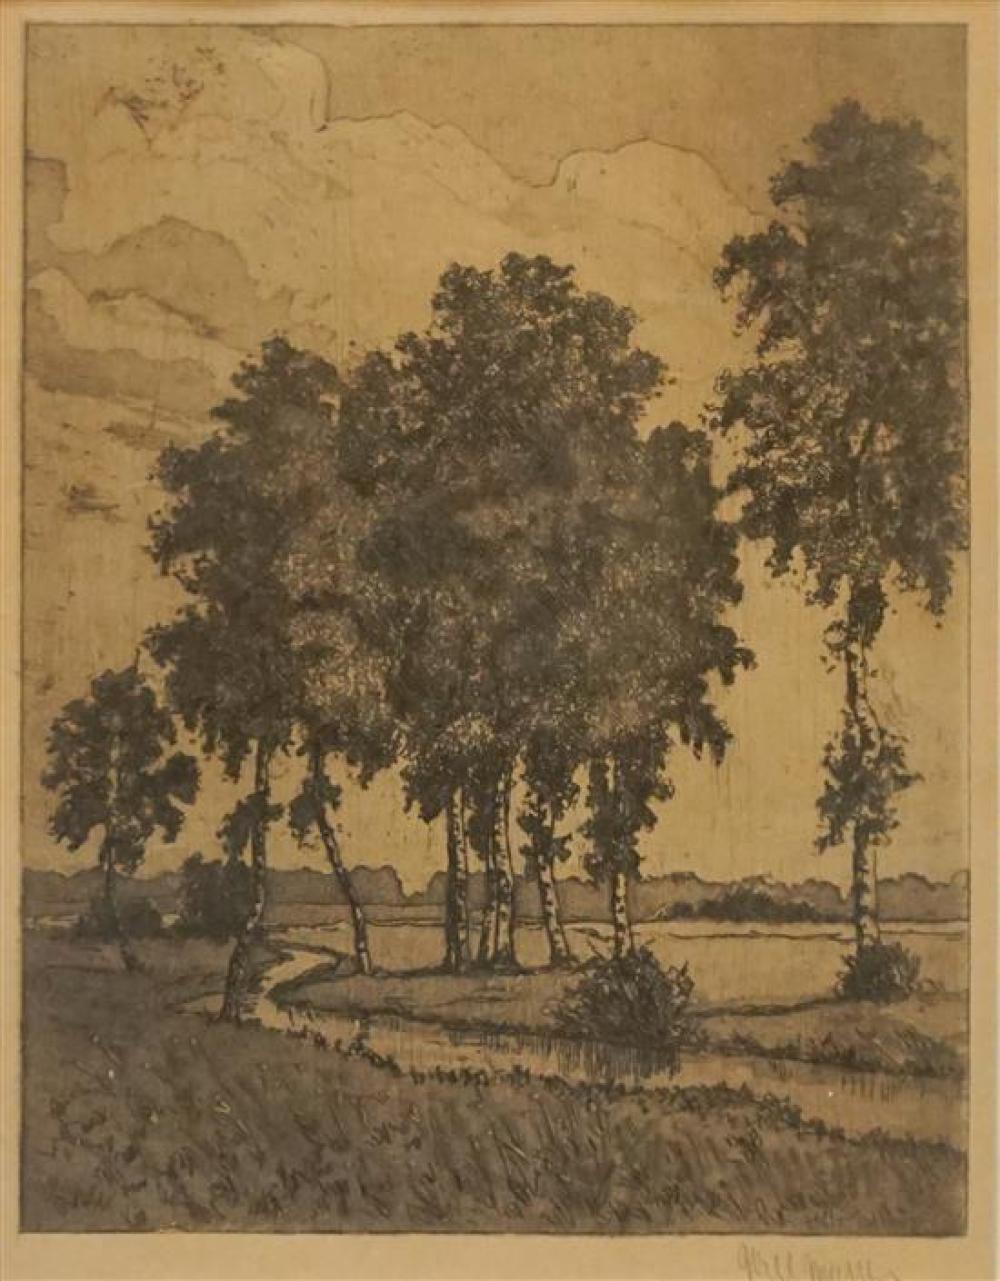 W MATHES TREES AND CREEK ETCHING  320b0f